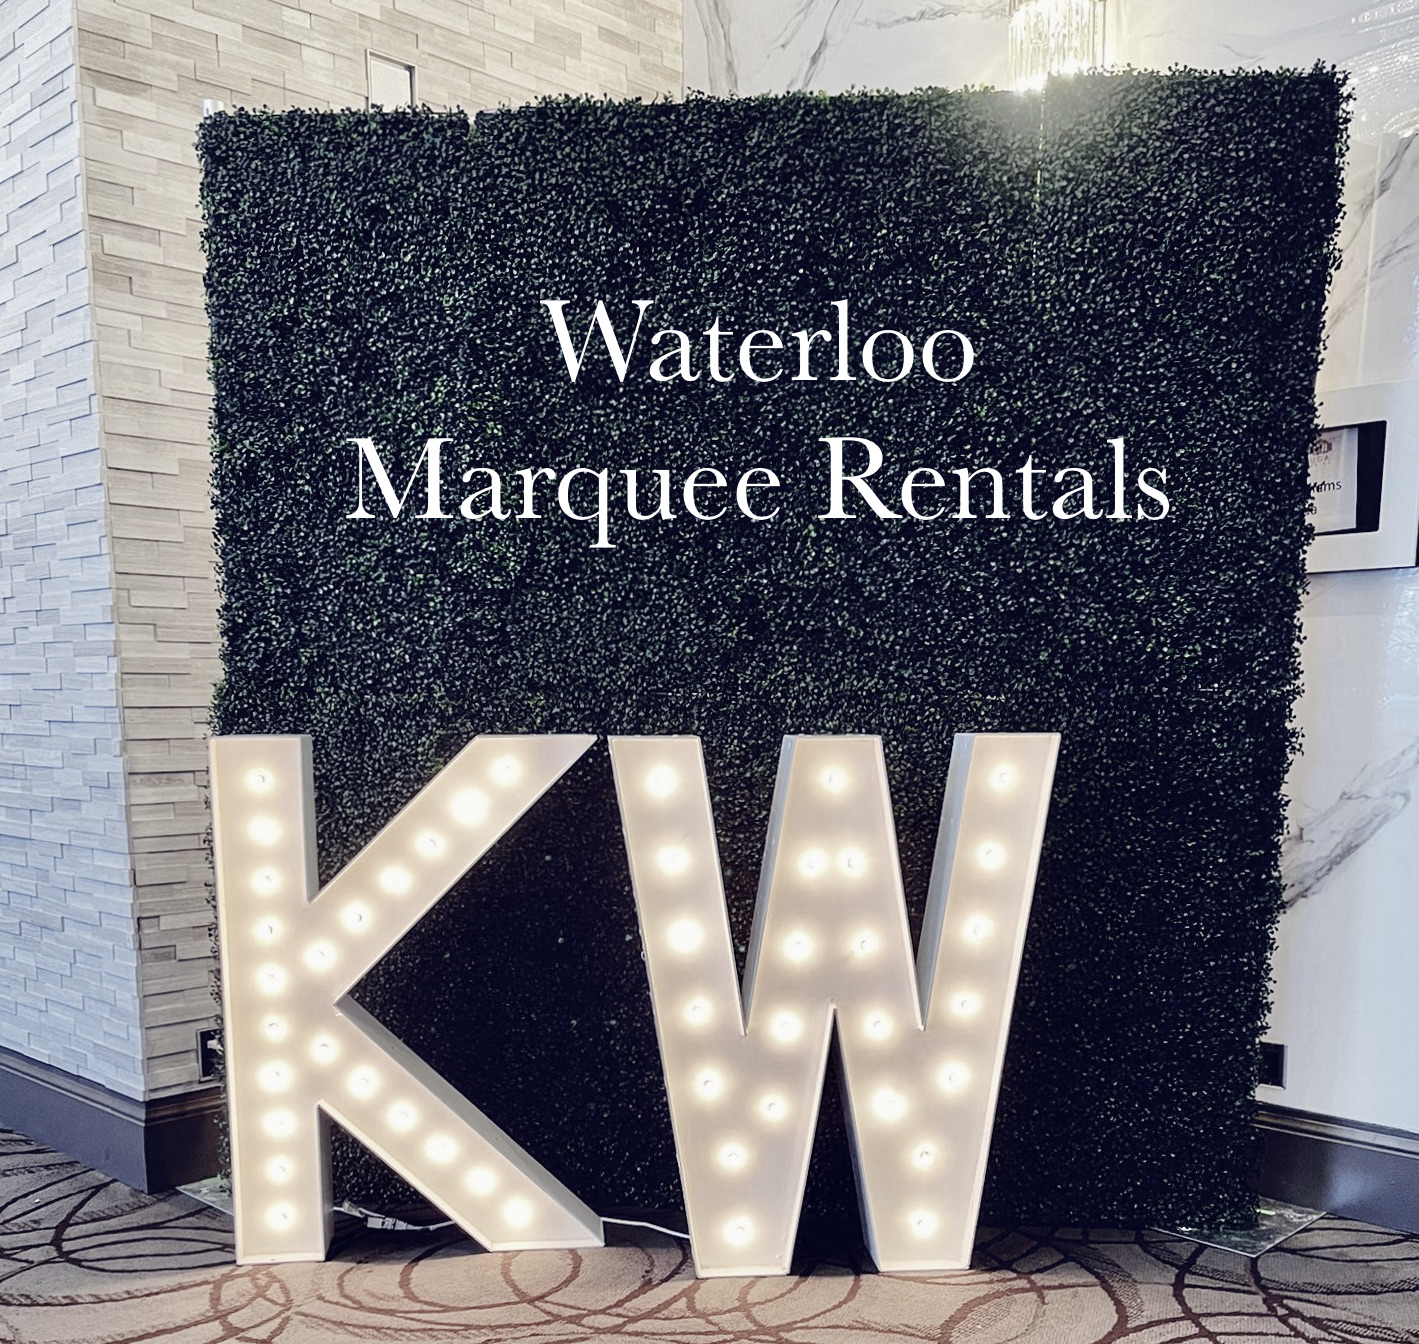 Waterloo marquee letters rental company